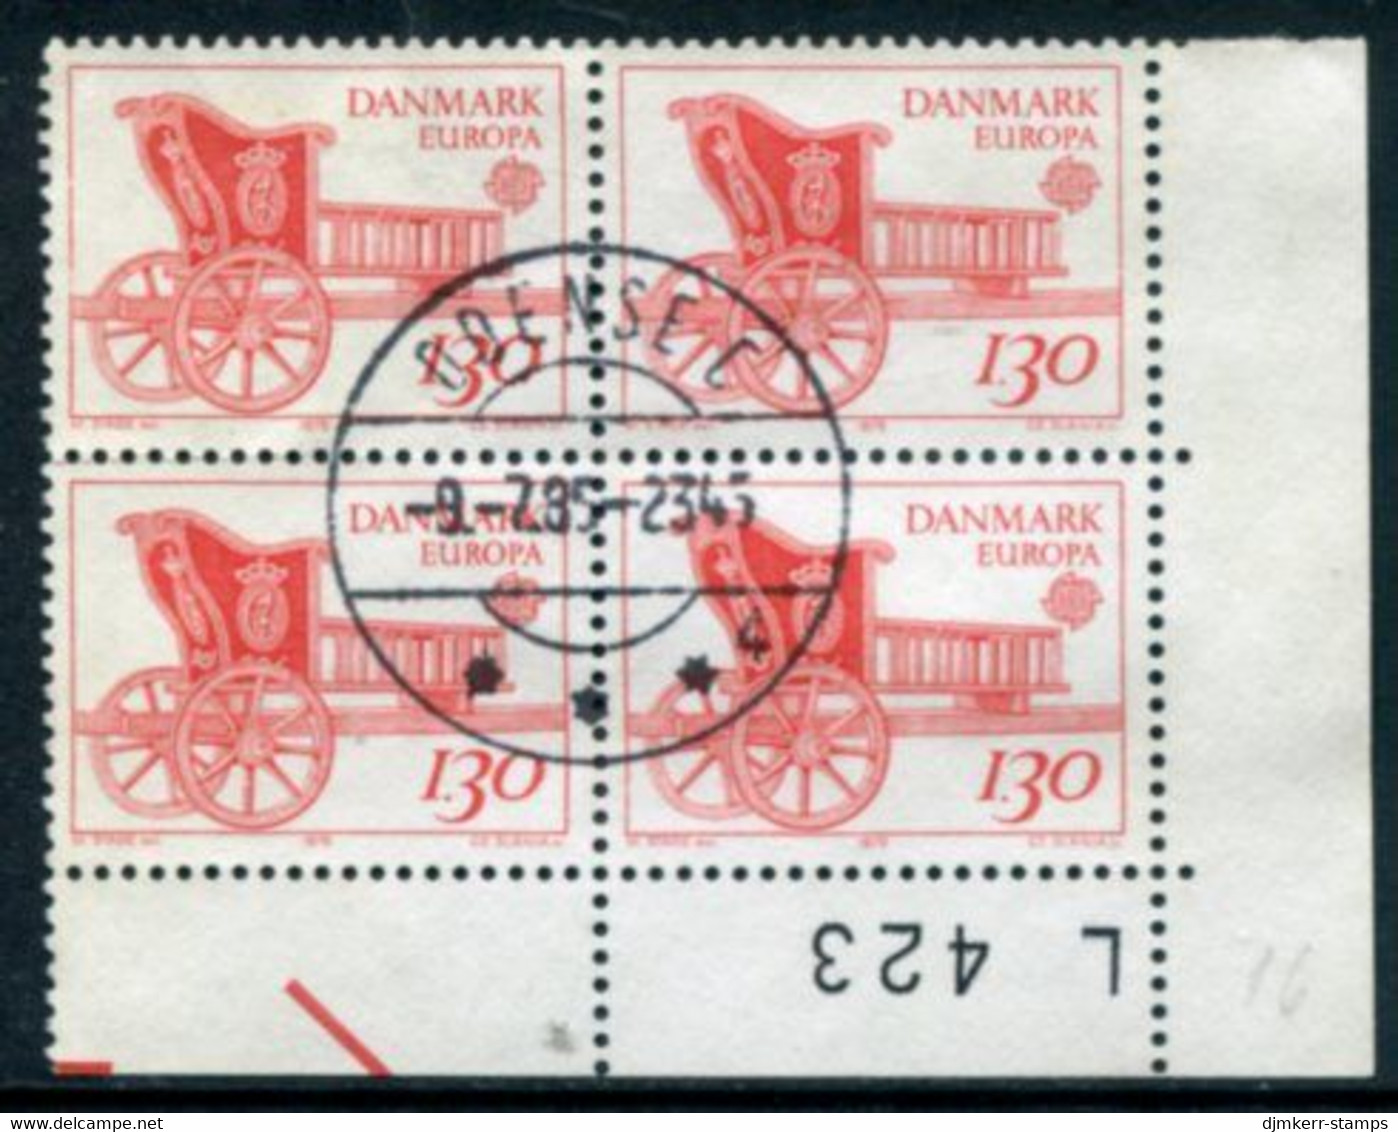 DENMARK 1979 Eurioa: History Of The Post 1.30 Kr. Block Of 4 Used   Michel 686 - Used Stamps